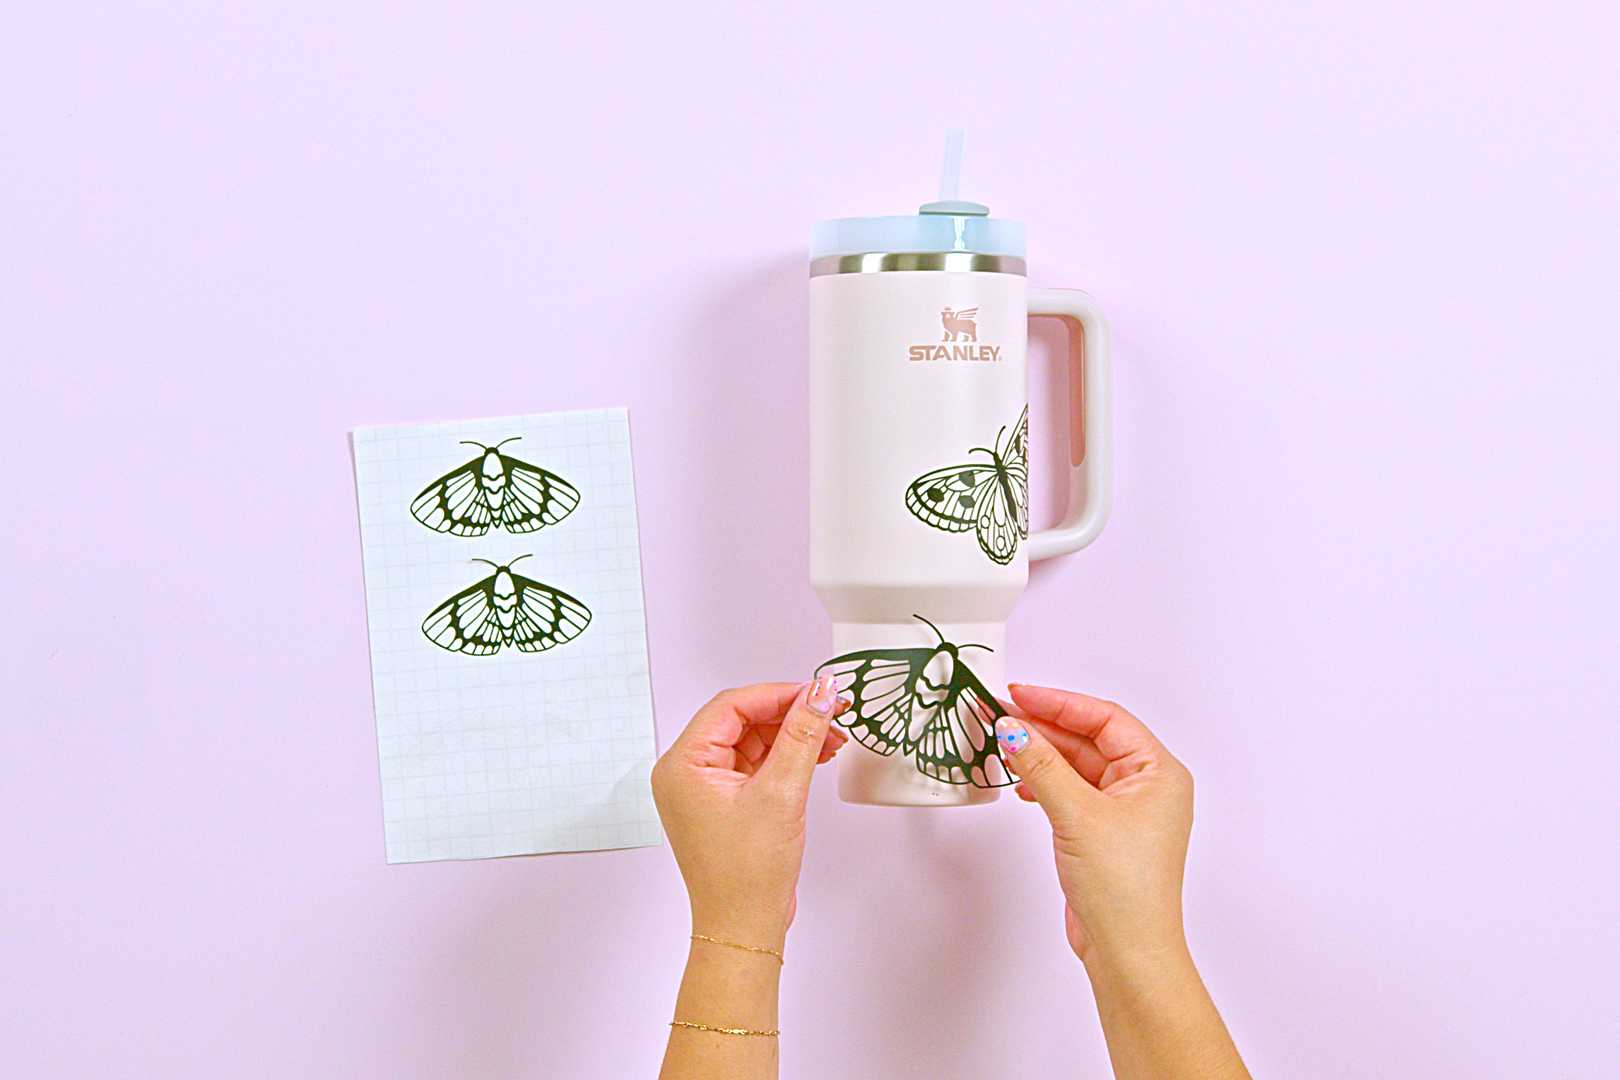 Prepare the tumbler cup and apply butterfly stencils